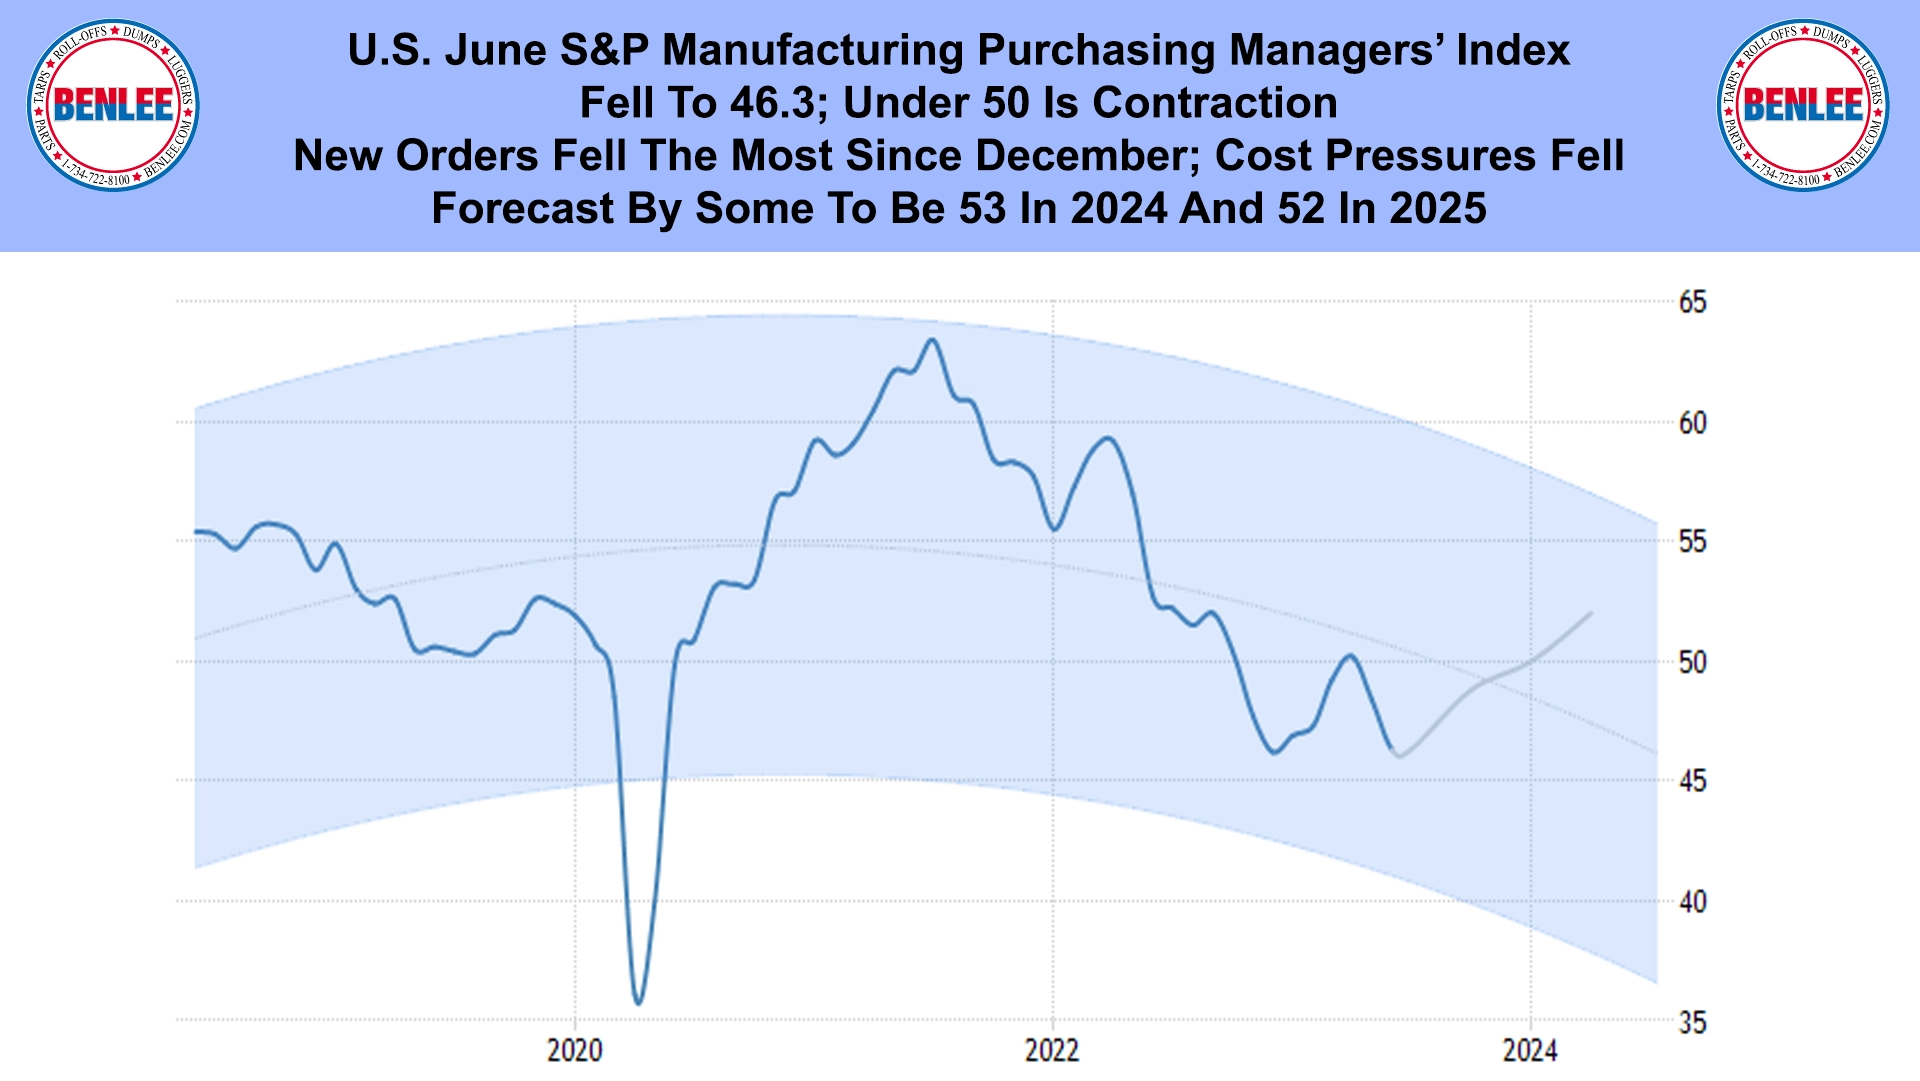 U.S. June S&P Manufacturing Purchasing Managers’ Index